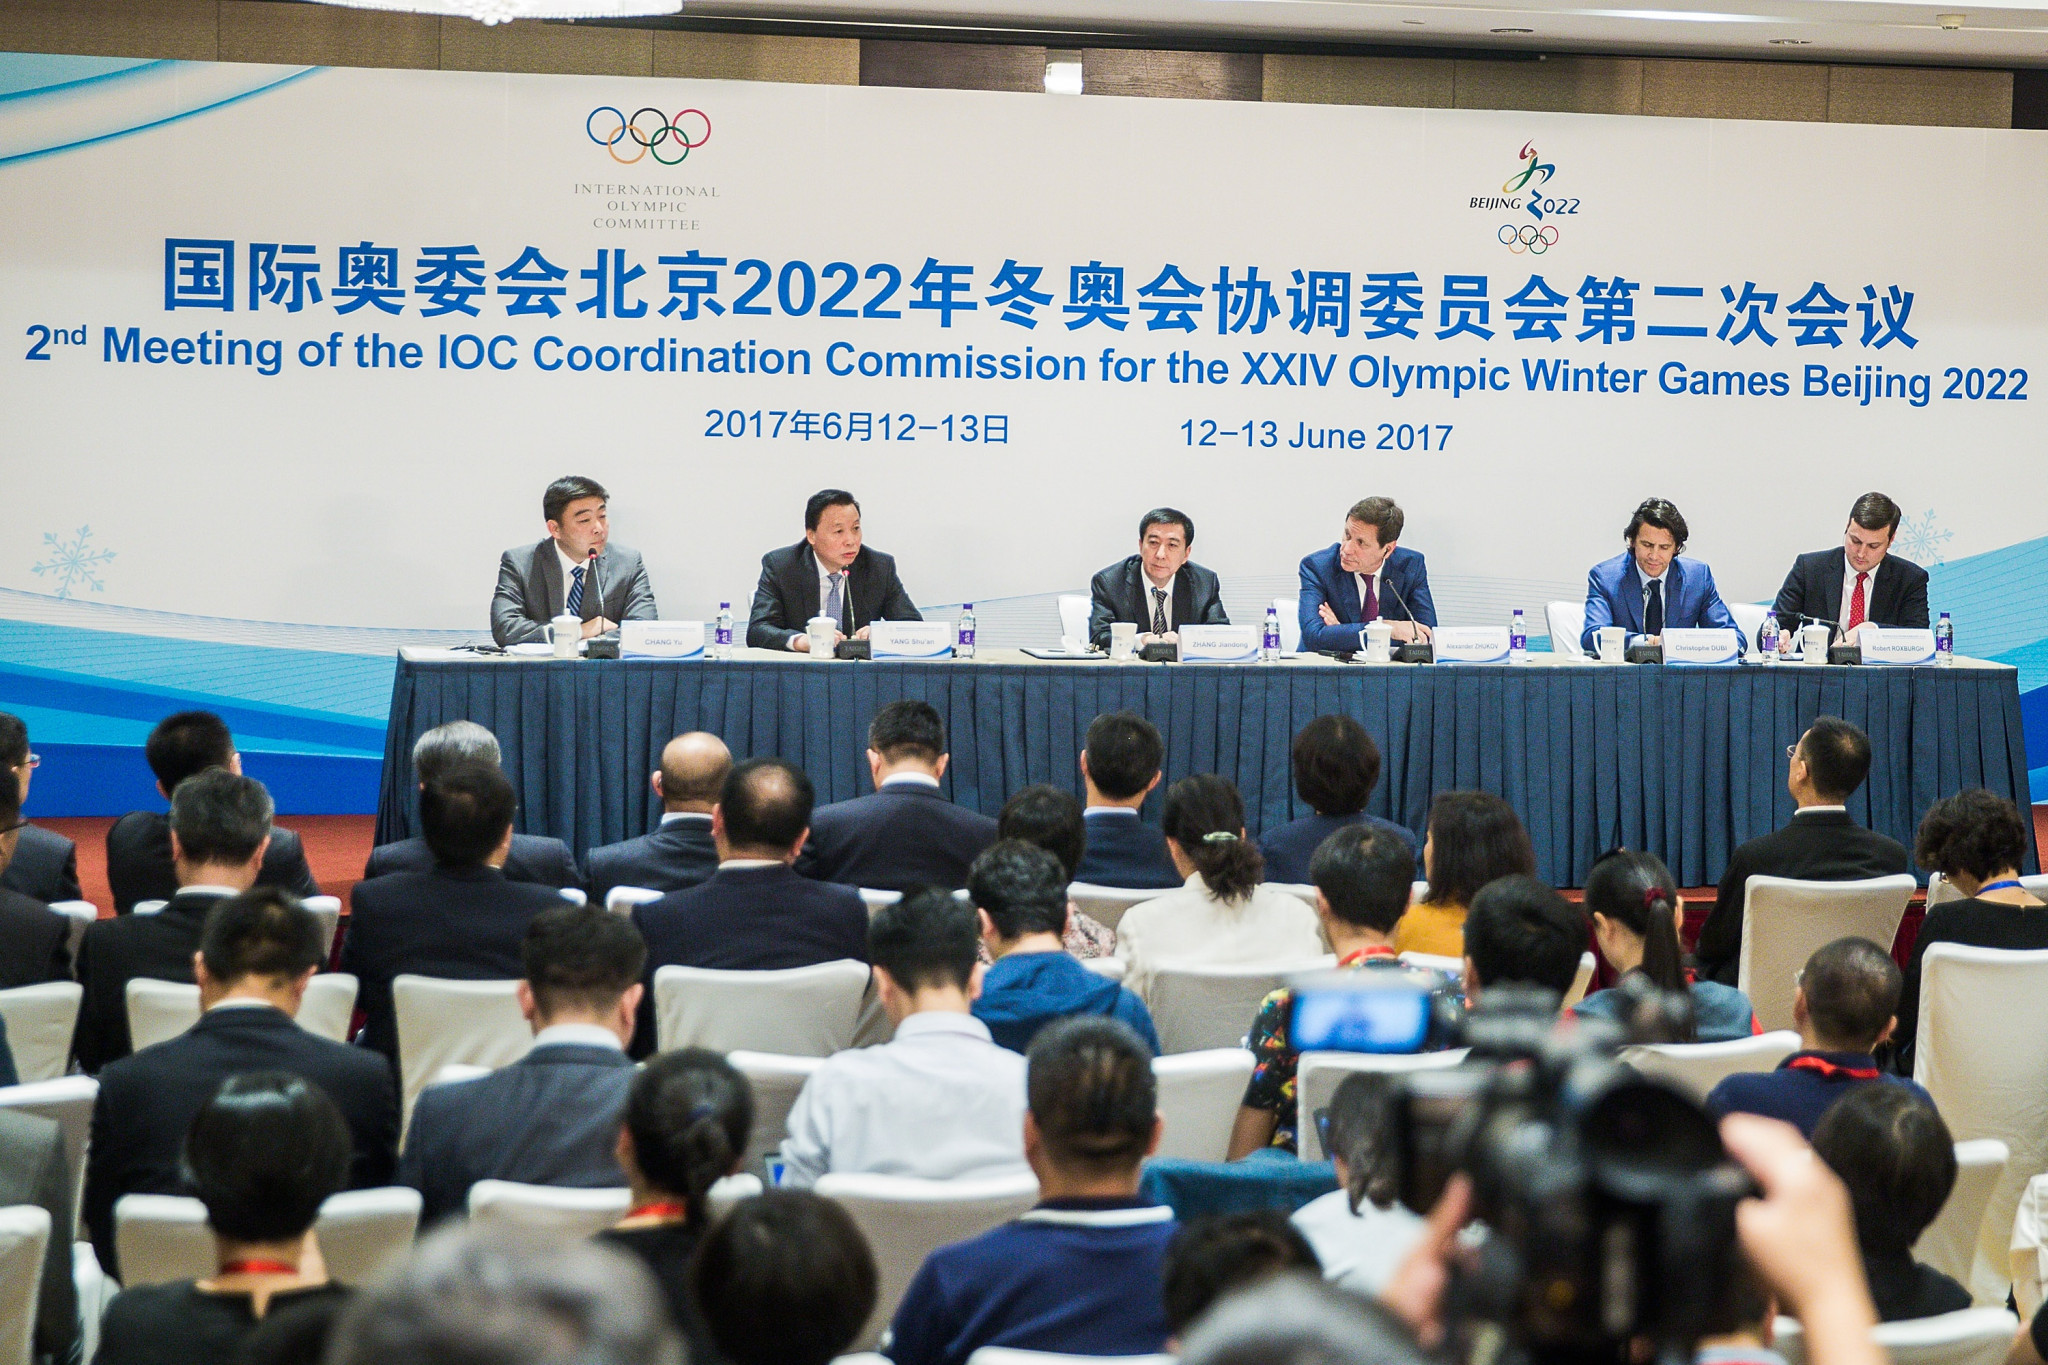 The appointment of Yang Yang was announced during the closing press conference of the IOC Coordination Commission visit to Beijing in June ©Getty Images